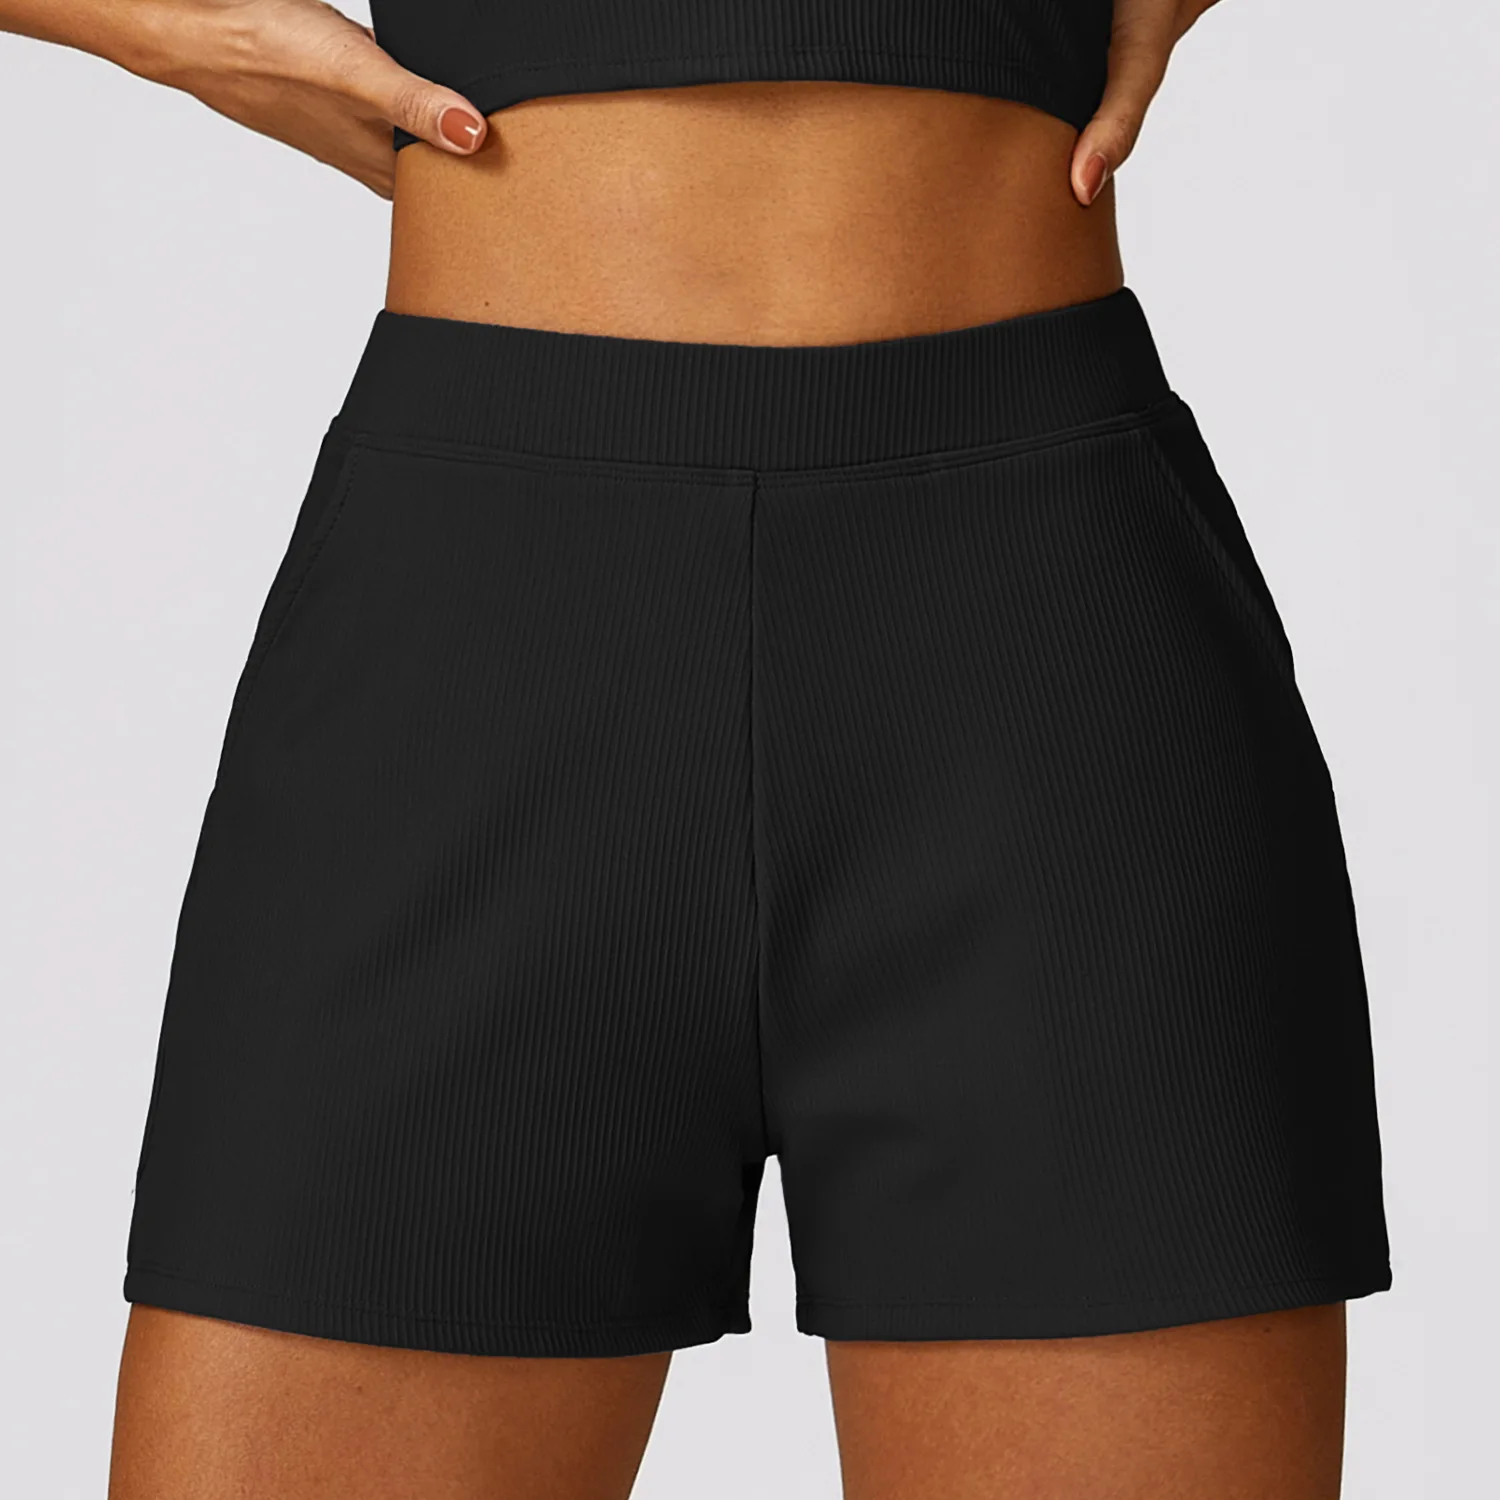 Hot Sale Fitness Running Tight Active Sports Fabric Workout Gym Sportswear Women Shorts Pants Women Yoga Shorts With Pocket